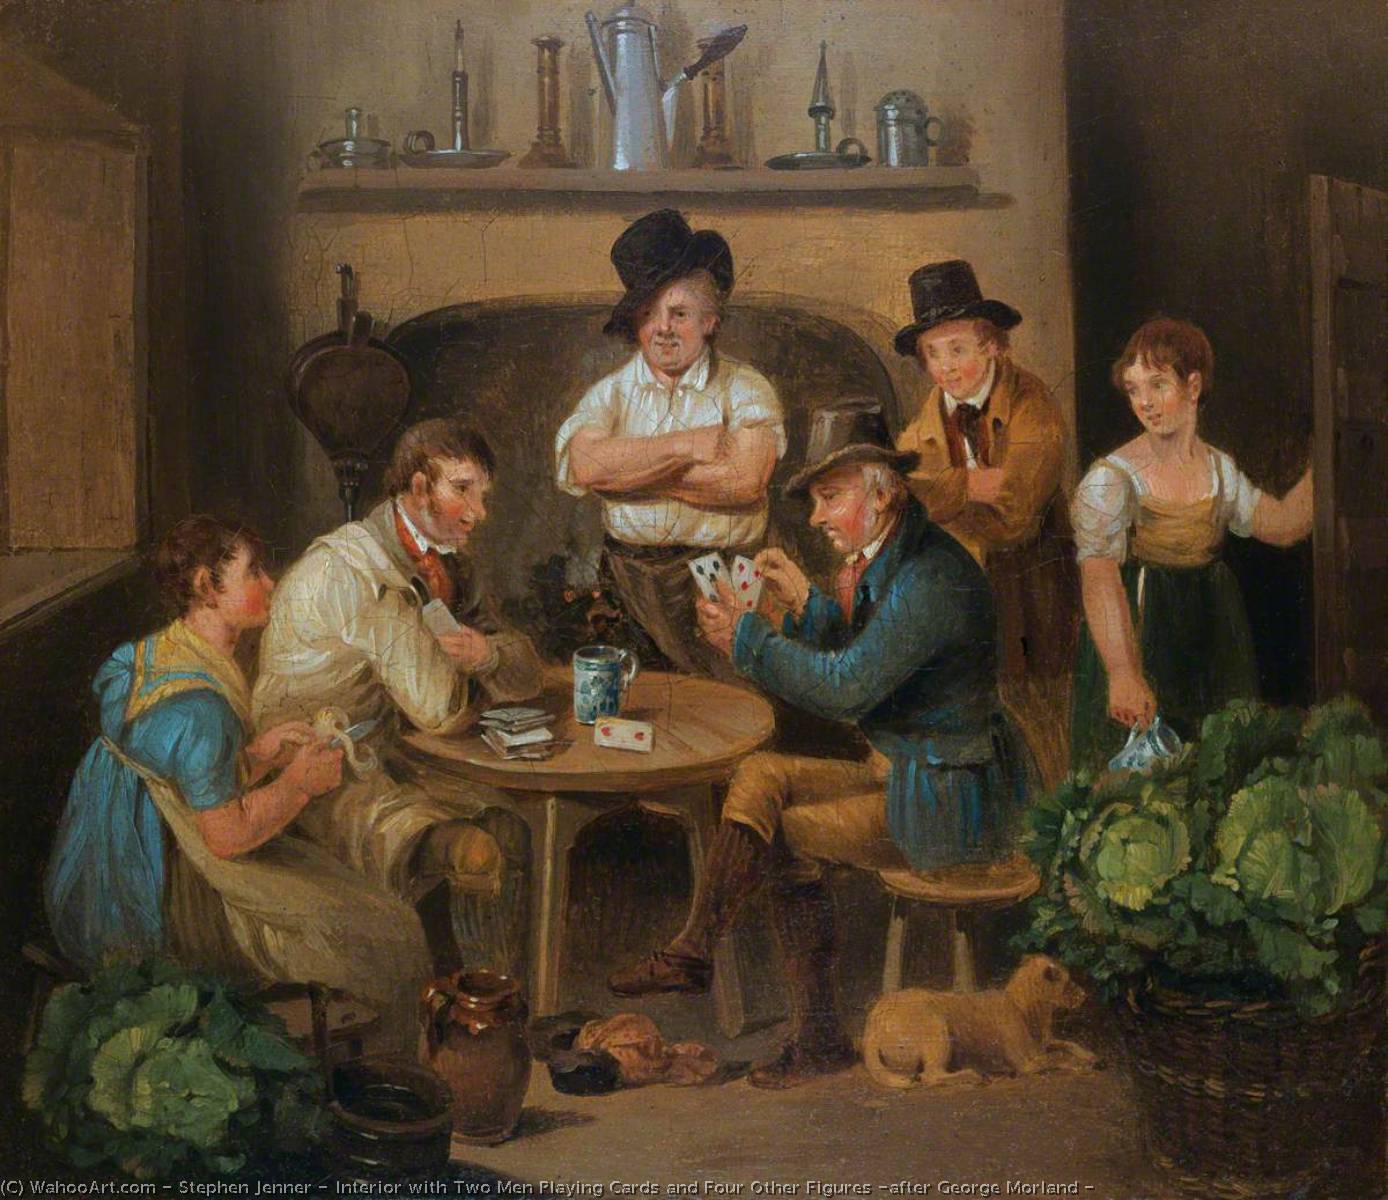 WikiOO.org - Enciclopédia das Belas Artes - Pintura, Arte por Stephen Jenner - Interior with Two Men Playing Cards and Four Other Figures (after George Morland )